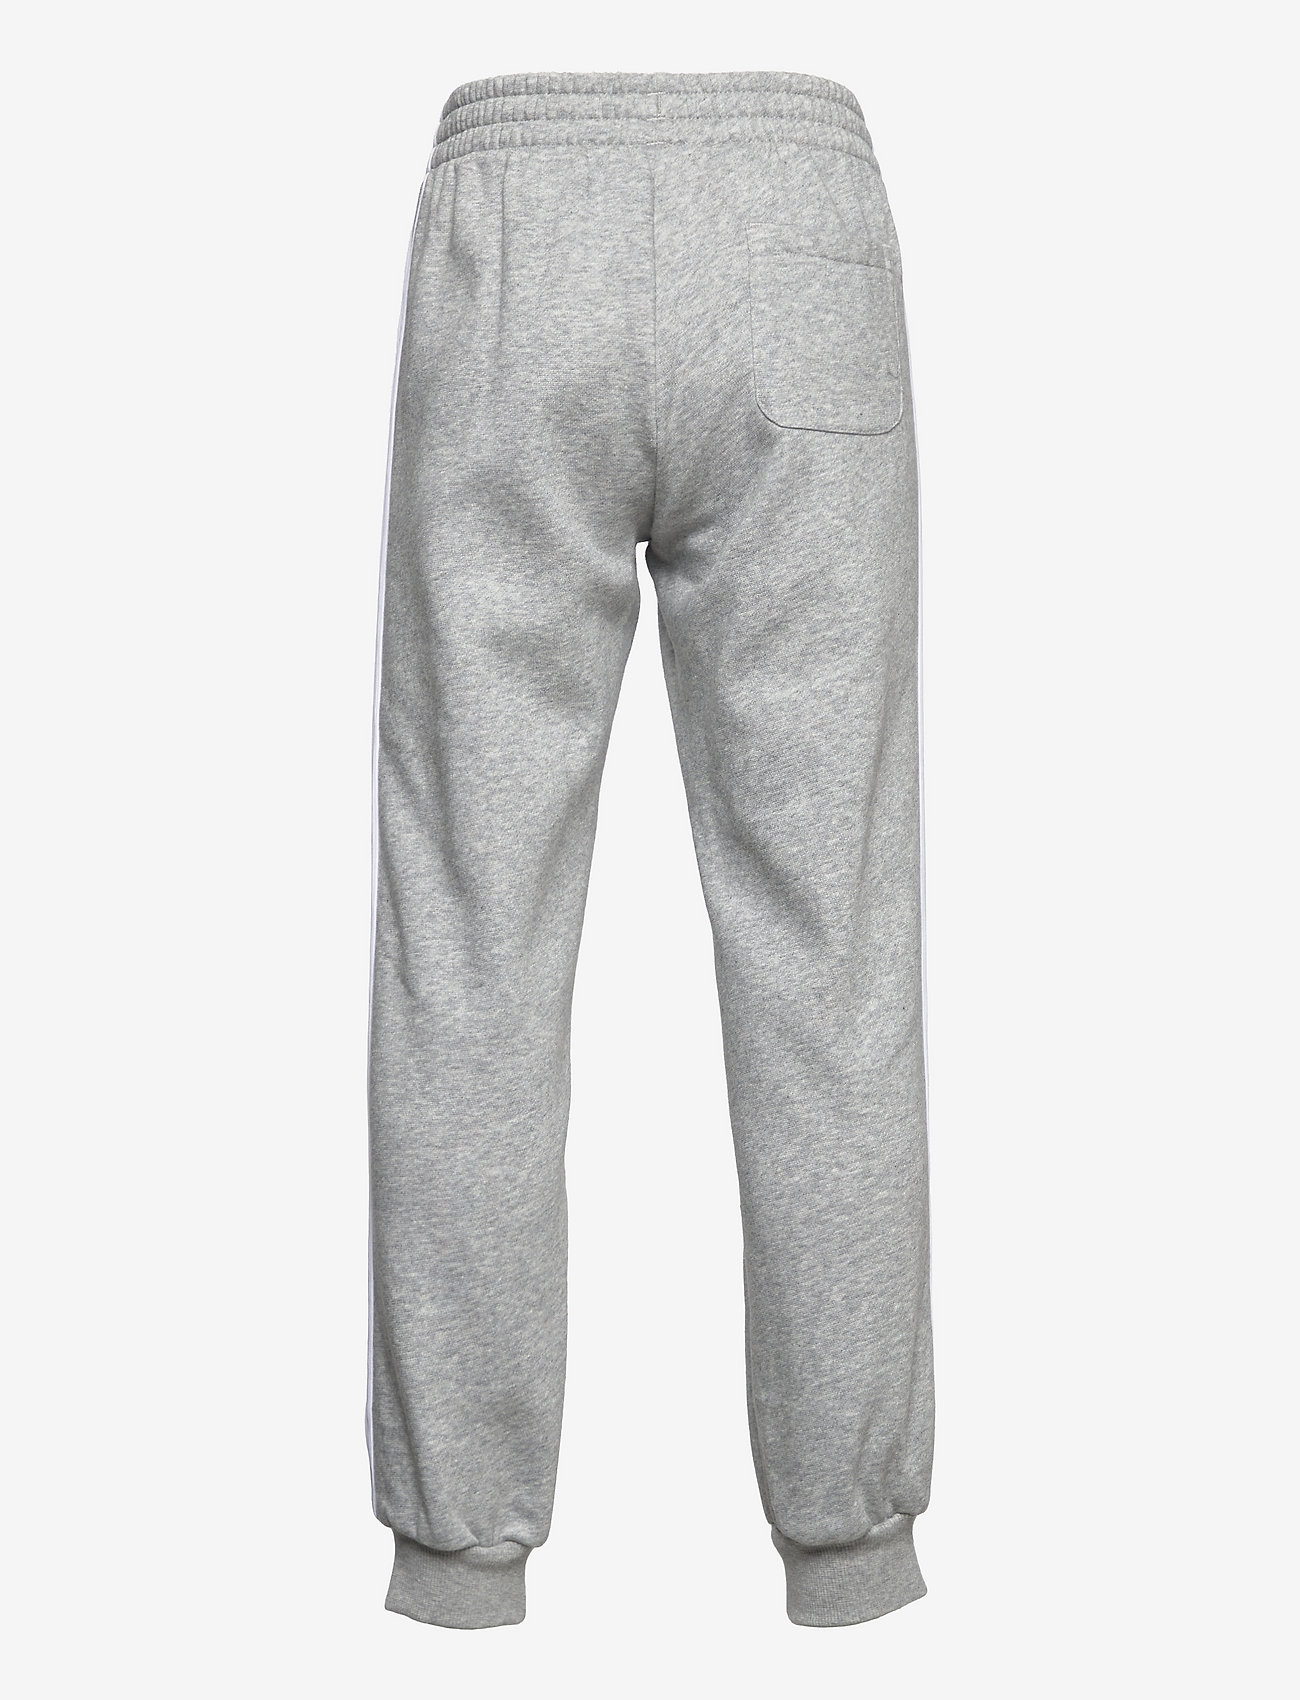 adidas Sportswear - LK 3S PANT - lowest prices - mgreyh/white - 1